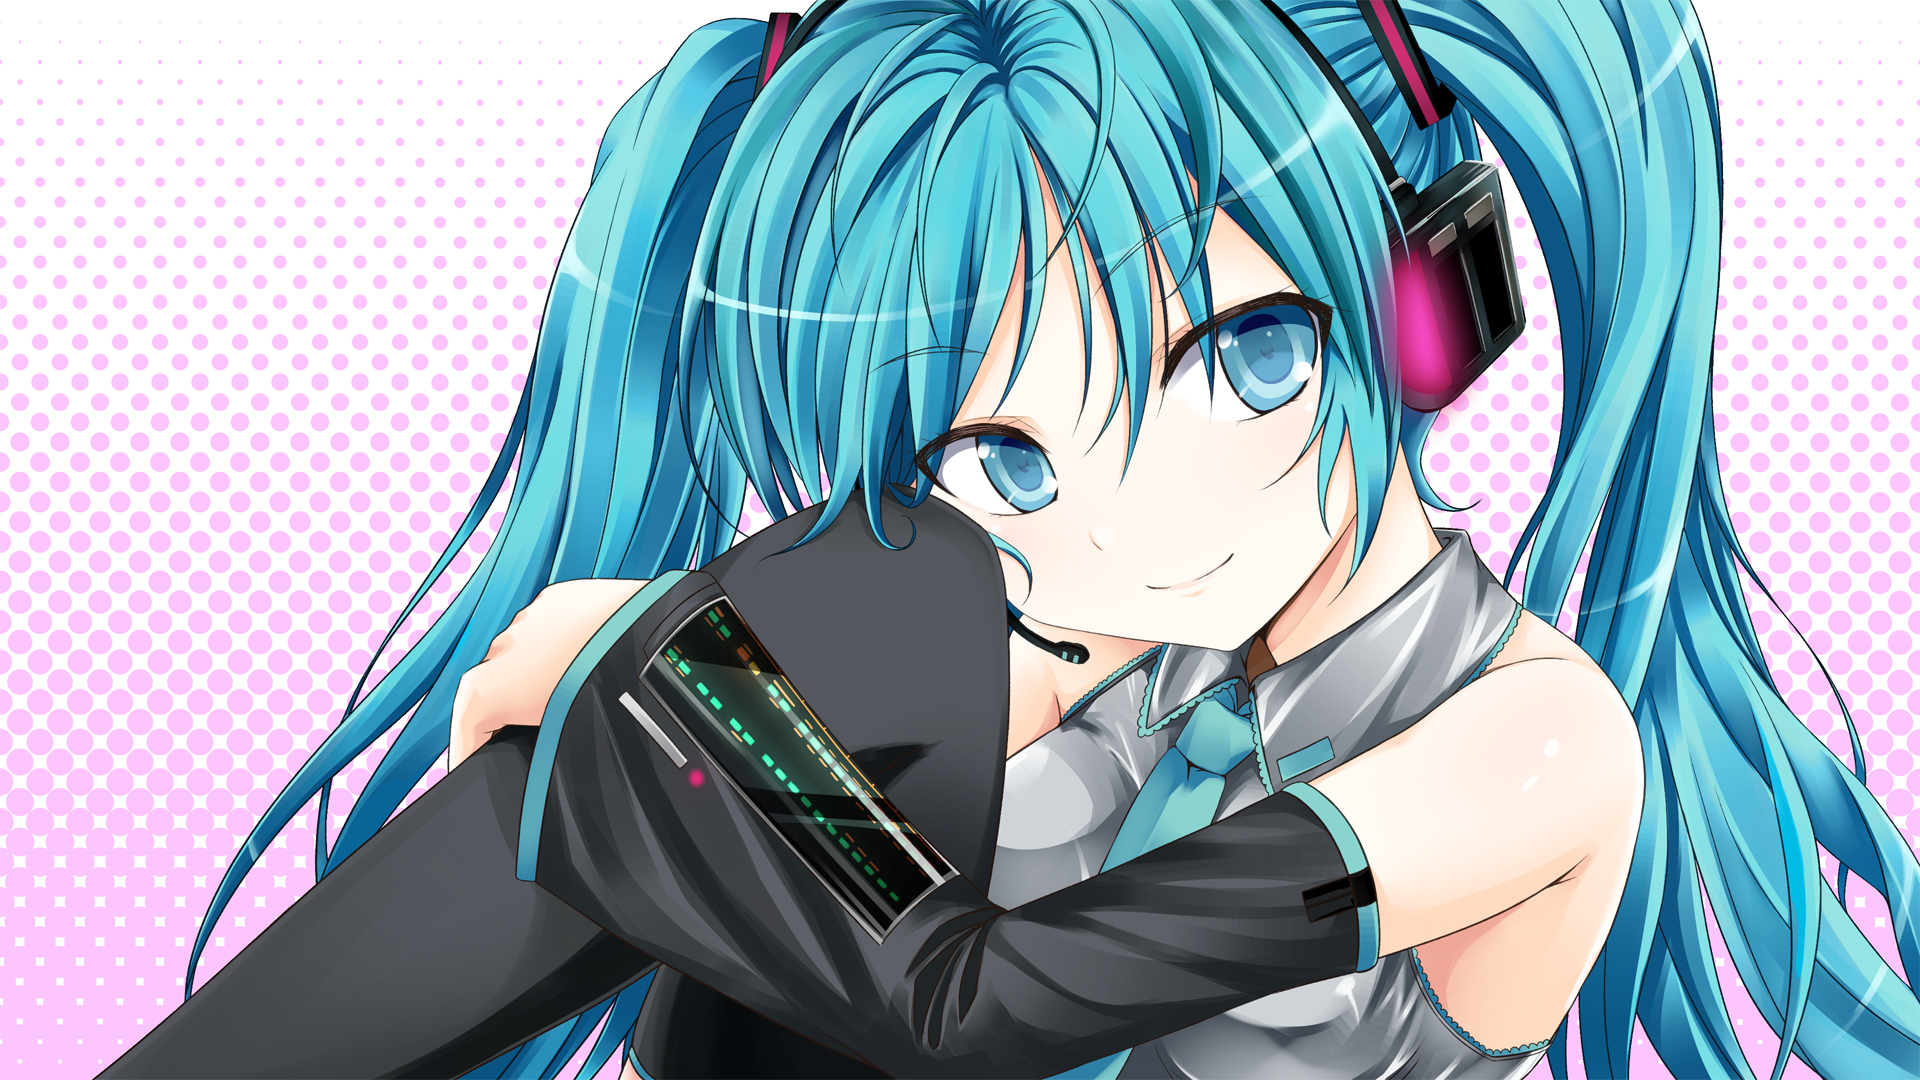 8. "Anime girl" by Hatsune Miku (song featuring an anime girl) - wide 6